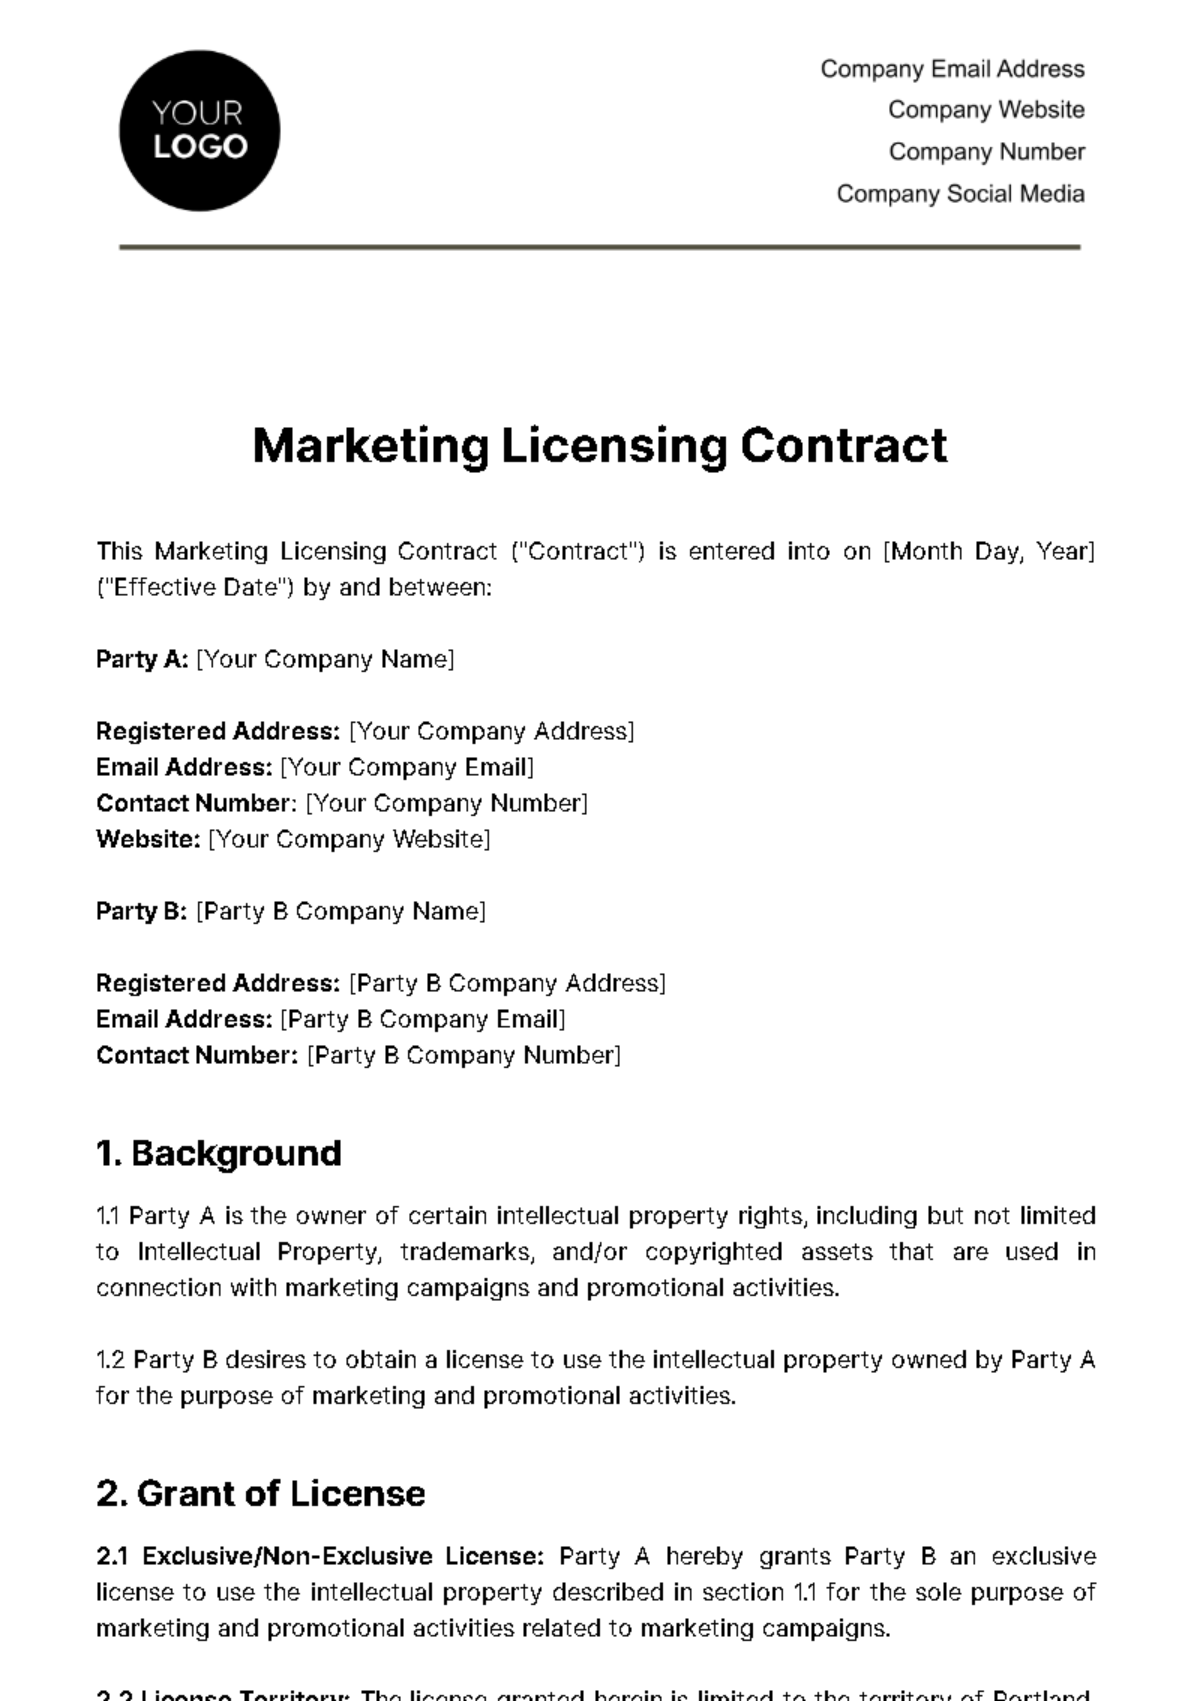 Free Marketing Licensing Contract Template